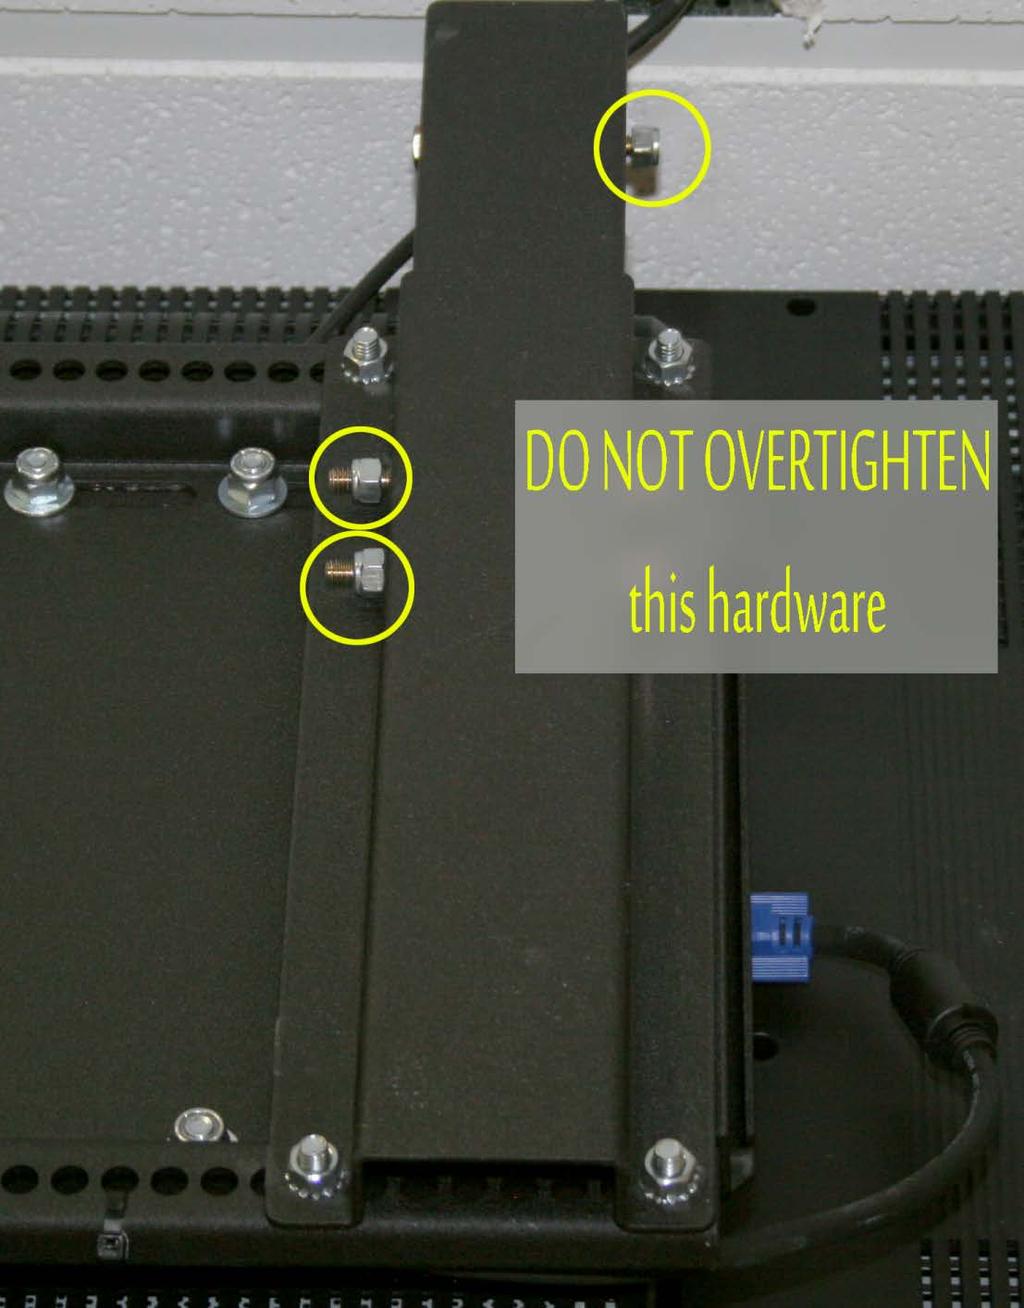 o o DO NOT OVERTIGHTEN the hardware that secures the hanger into the channel, as this will make it very hard to remove the hanger from the channel.